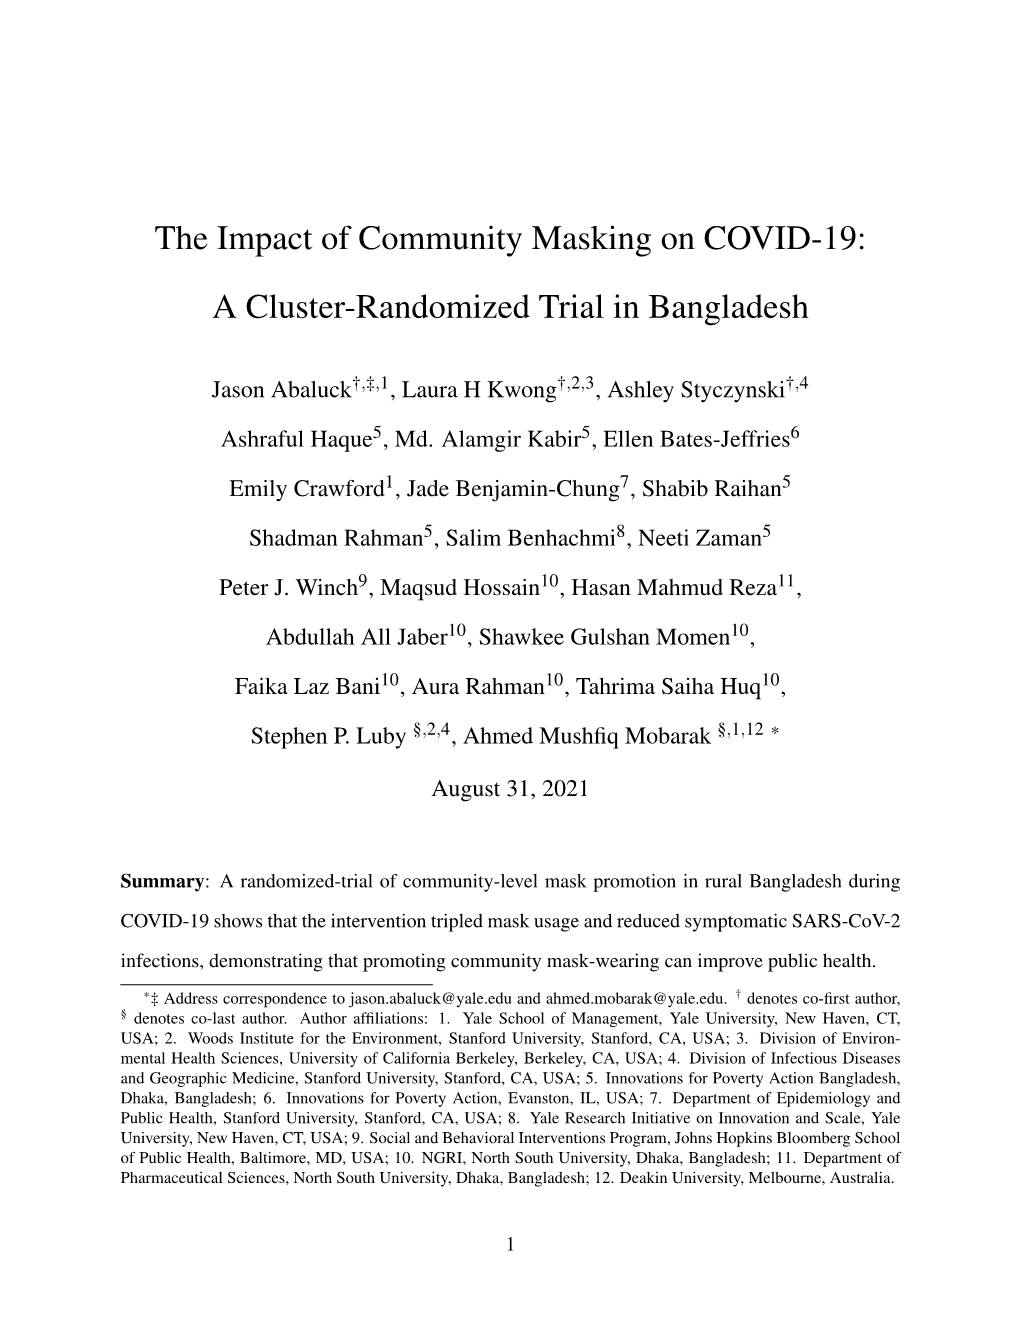 The Impact of Community Masking on COVID-19: a Cluster-Randomized Trial in Bangladesh